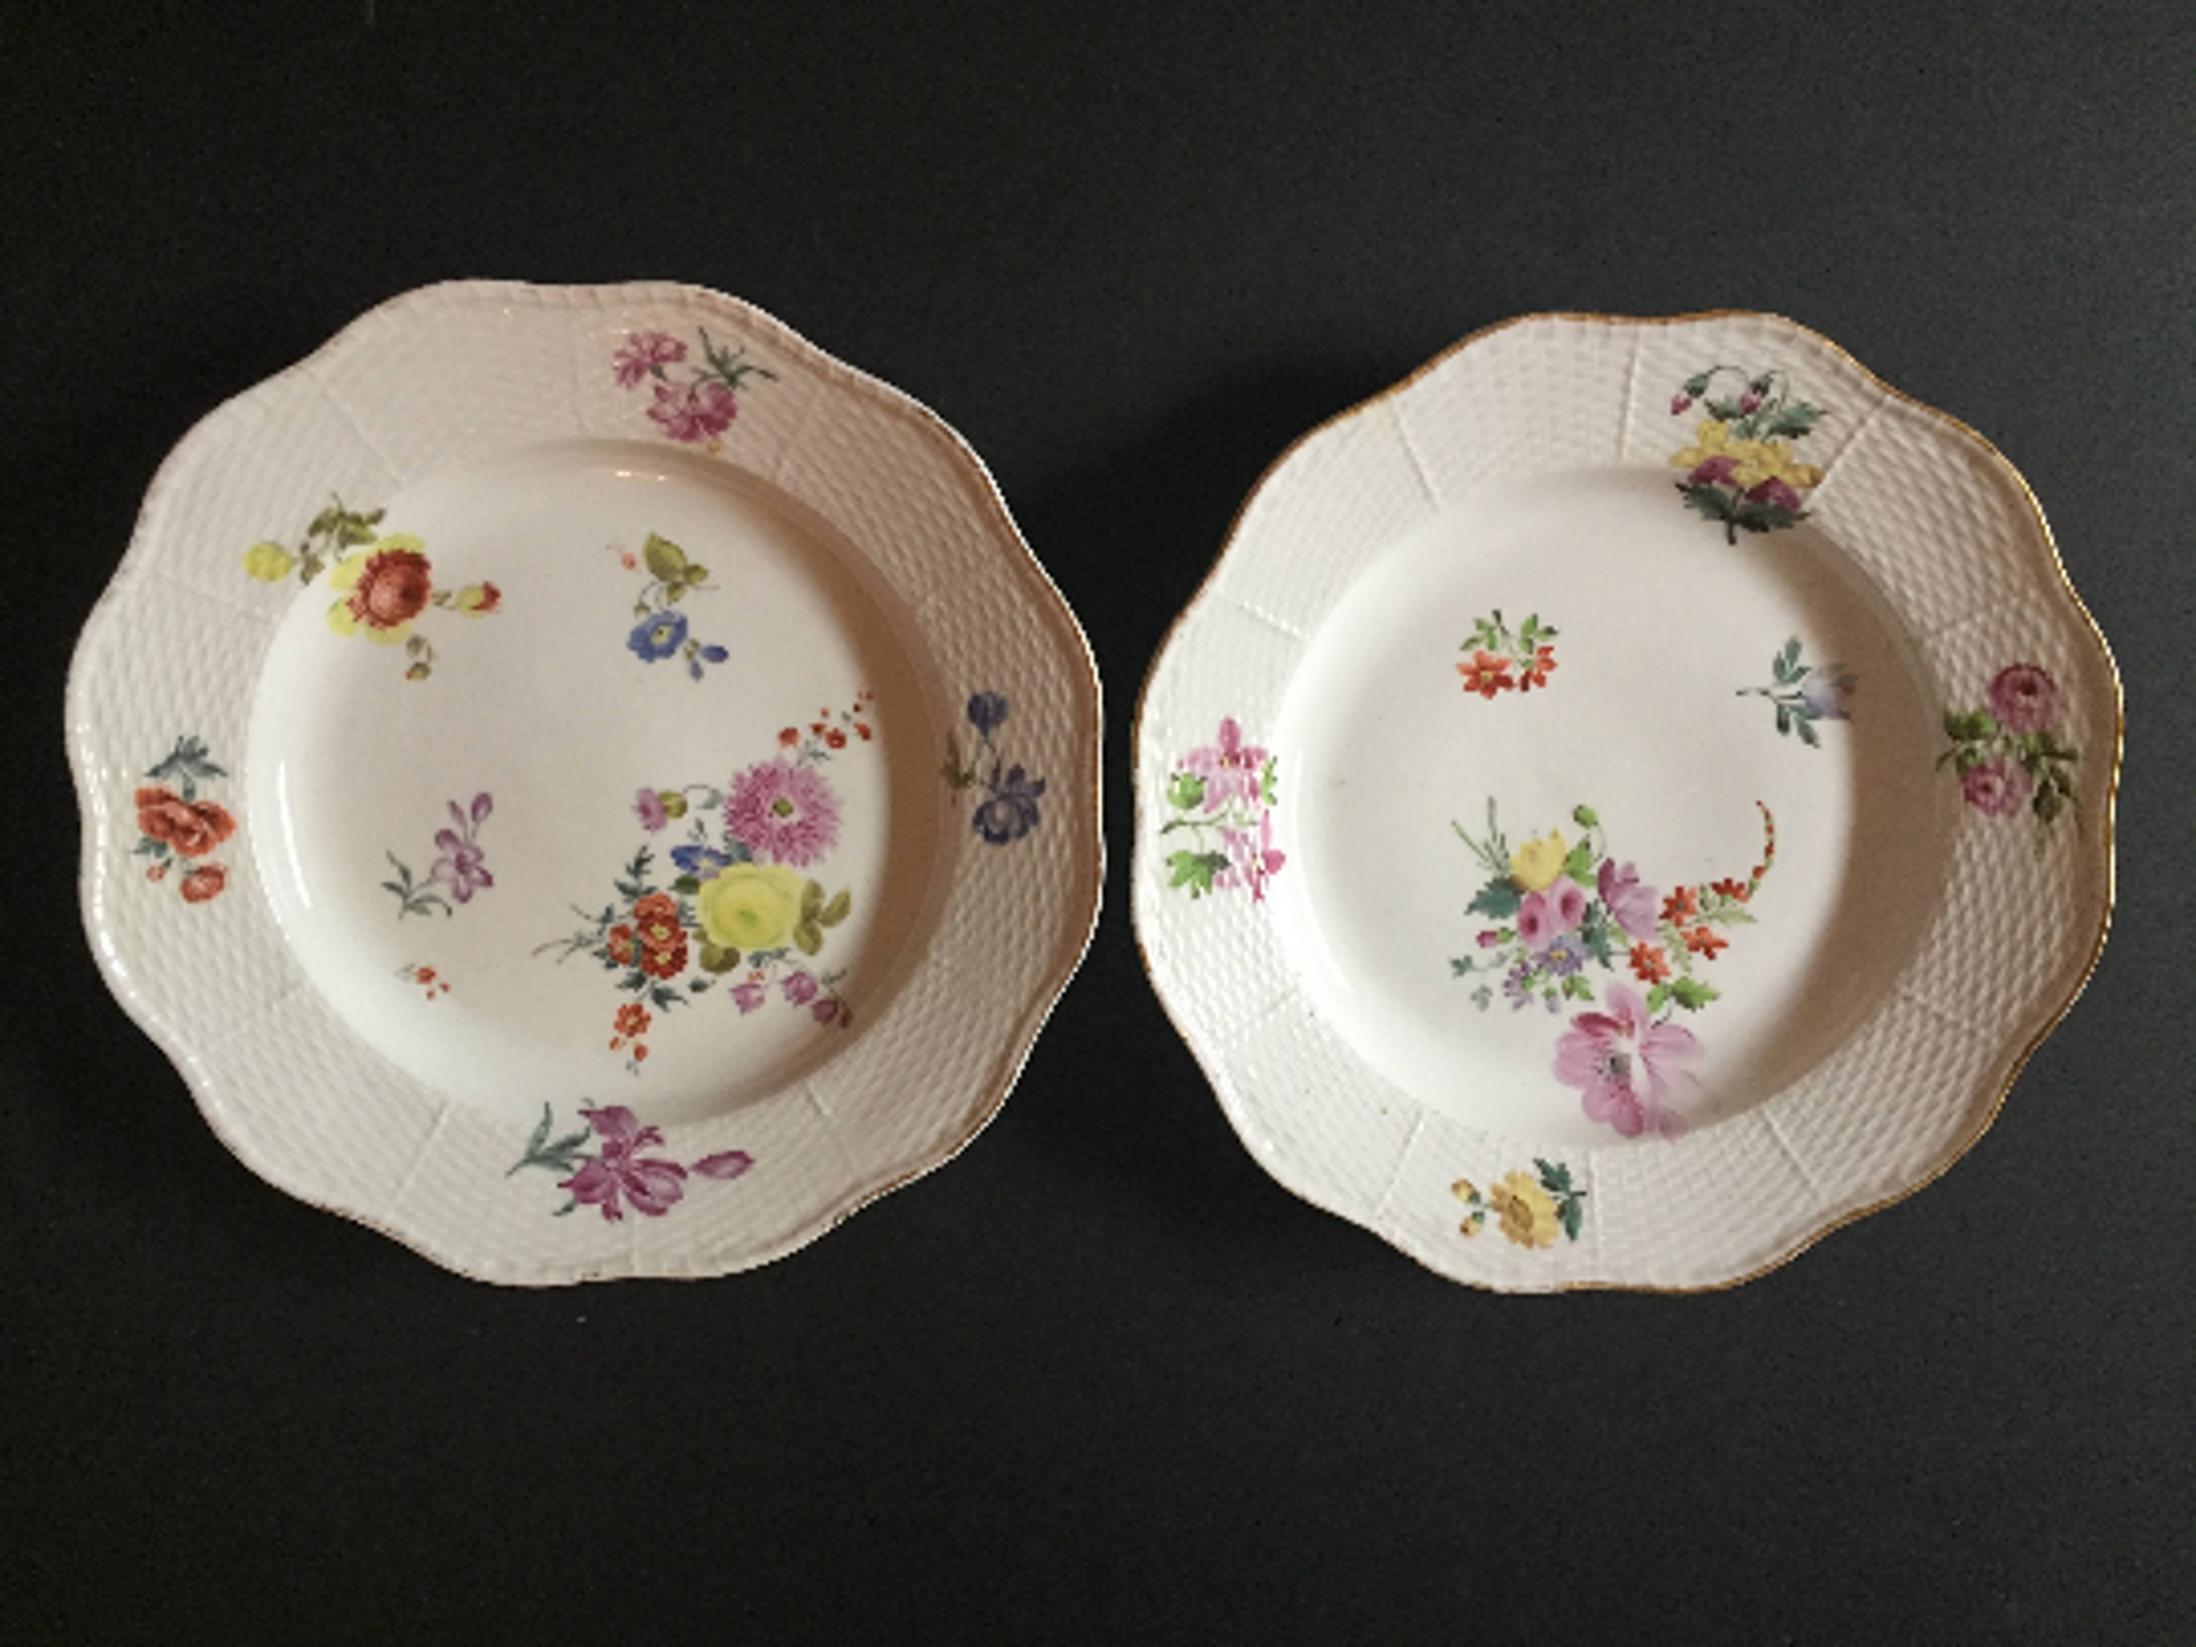 These dinner plates are beautifully decorated with a colorful mix of flowers. The borders have a molded basket-weave design framed with a thin gilt band on the scalloped rim edge. The center is decorated with hand painted polychrome enameled flower